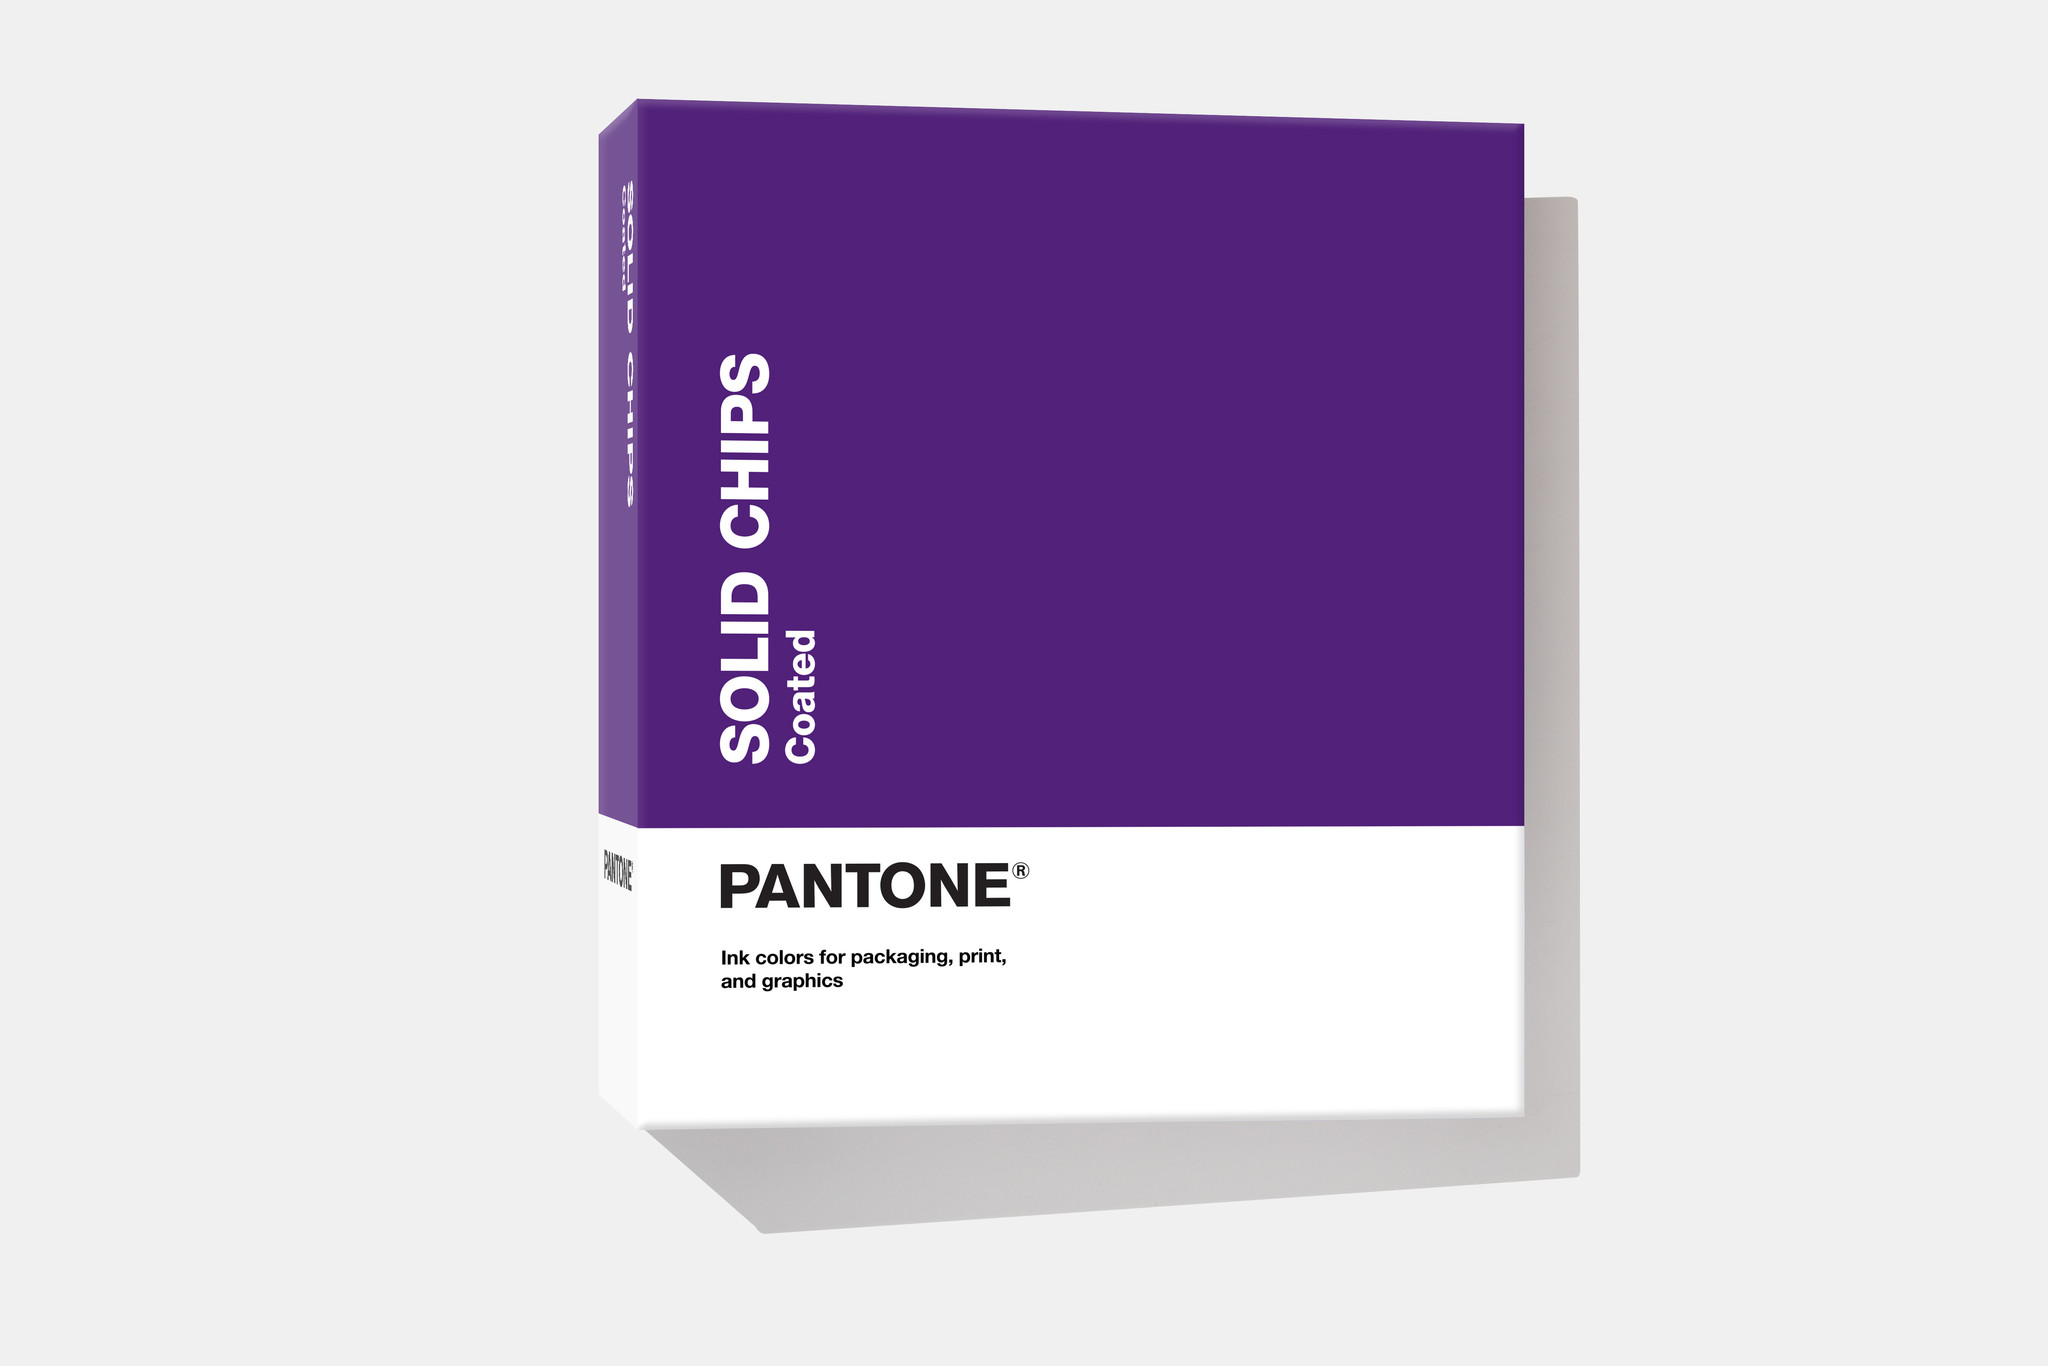 PANTONE PANTONE Solid Chips (Coated & Uncoated)